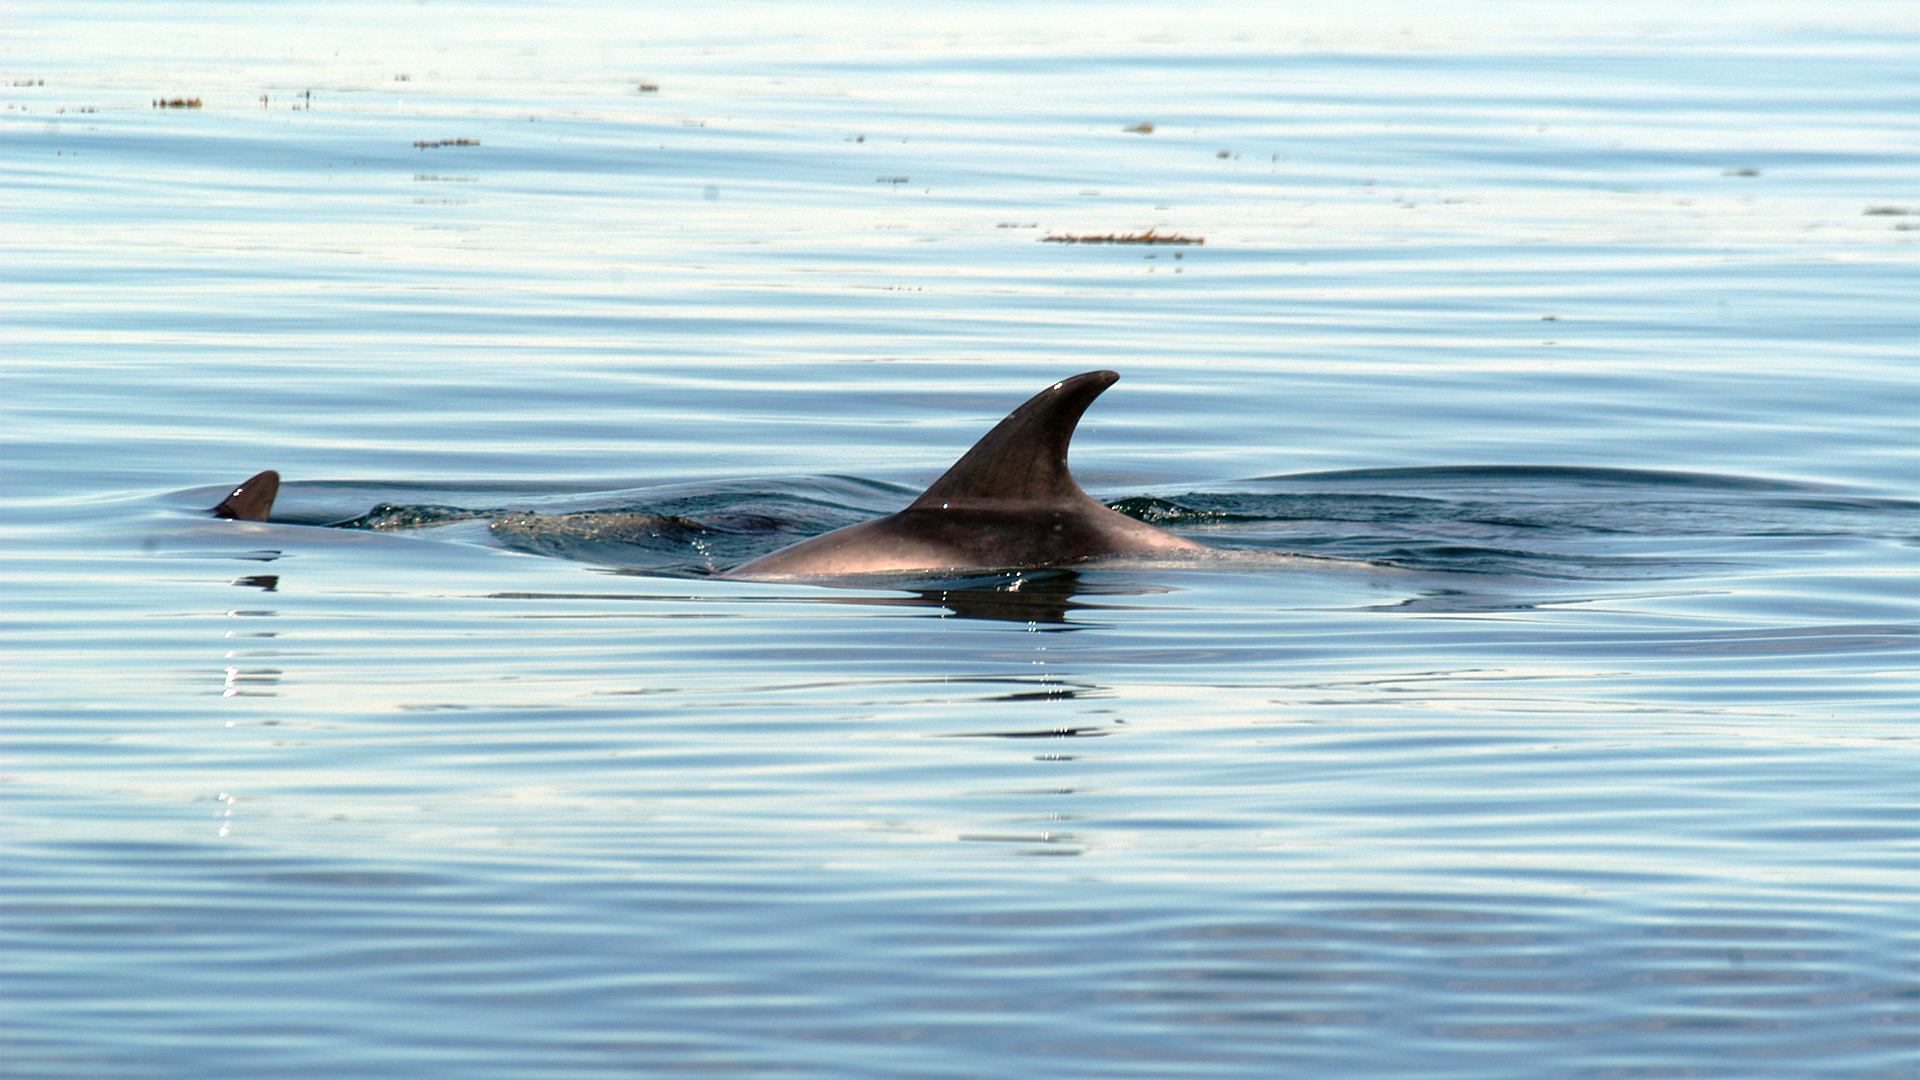 The back of a dolphin with its sickle-shaped dorsal fin.